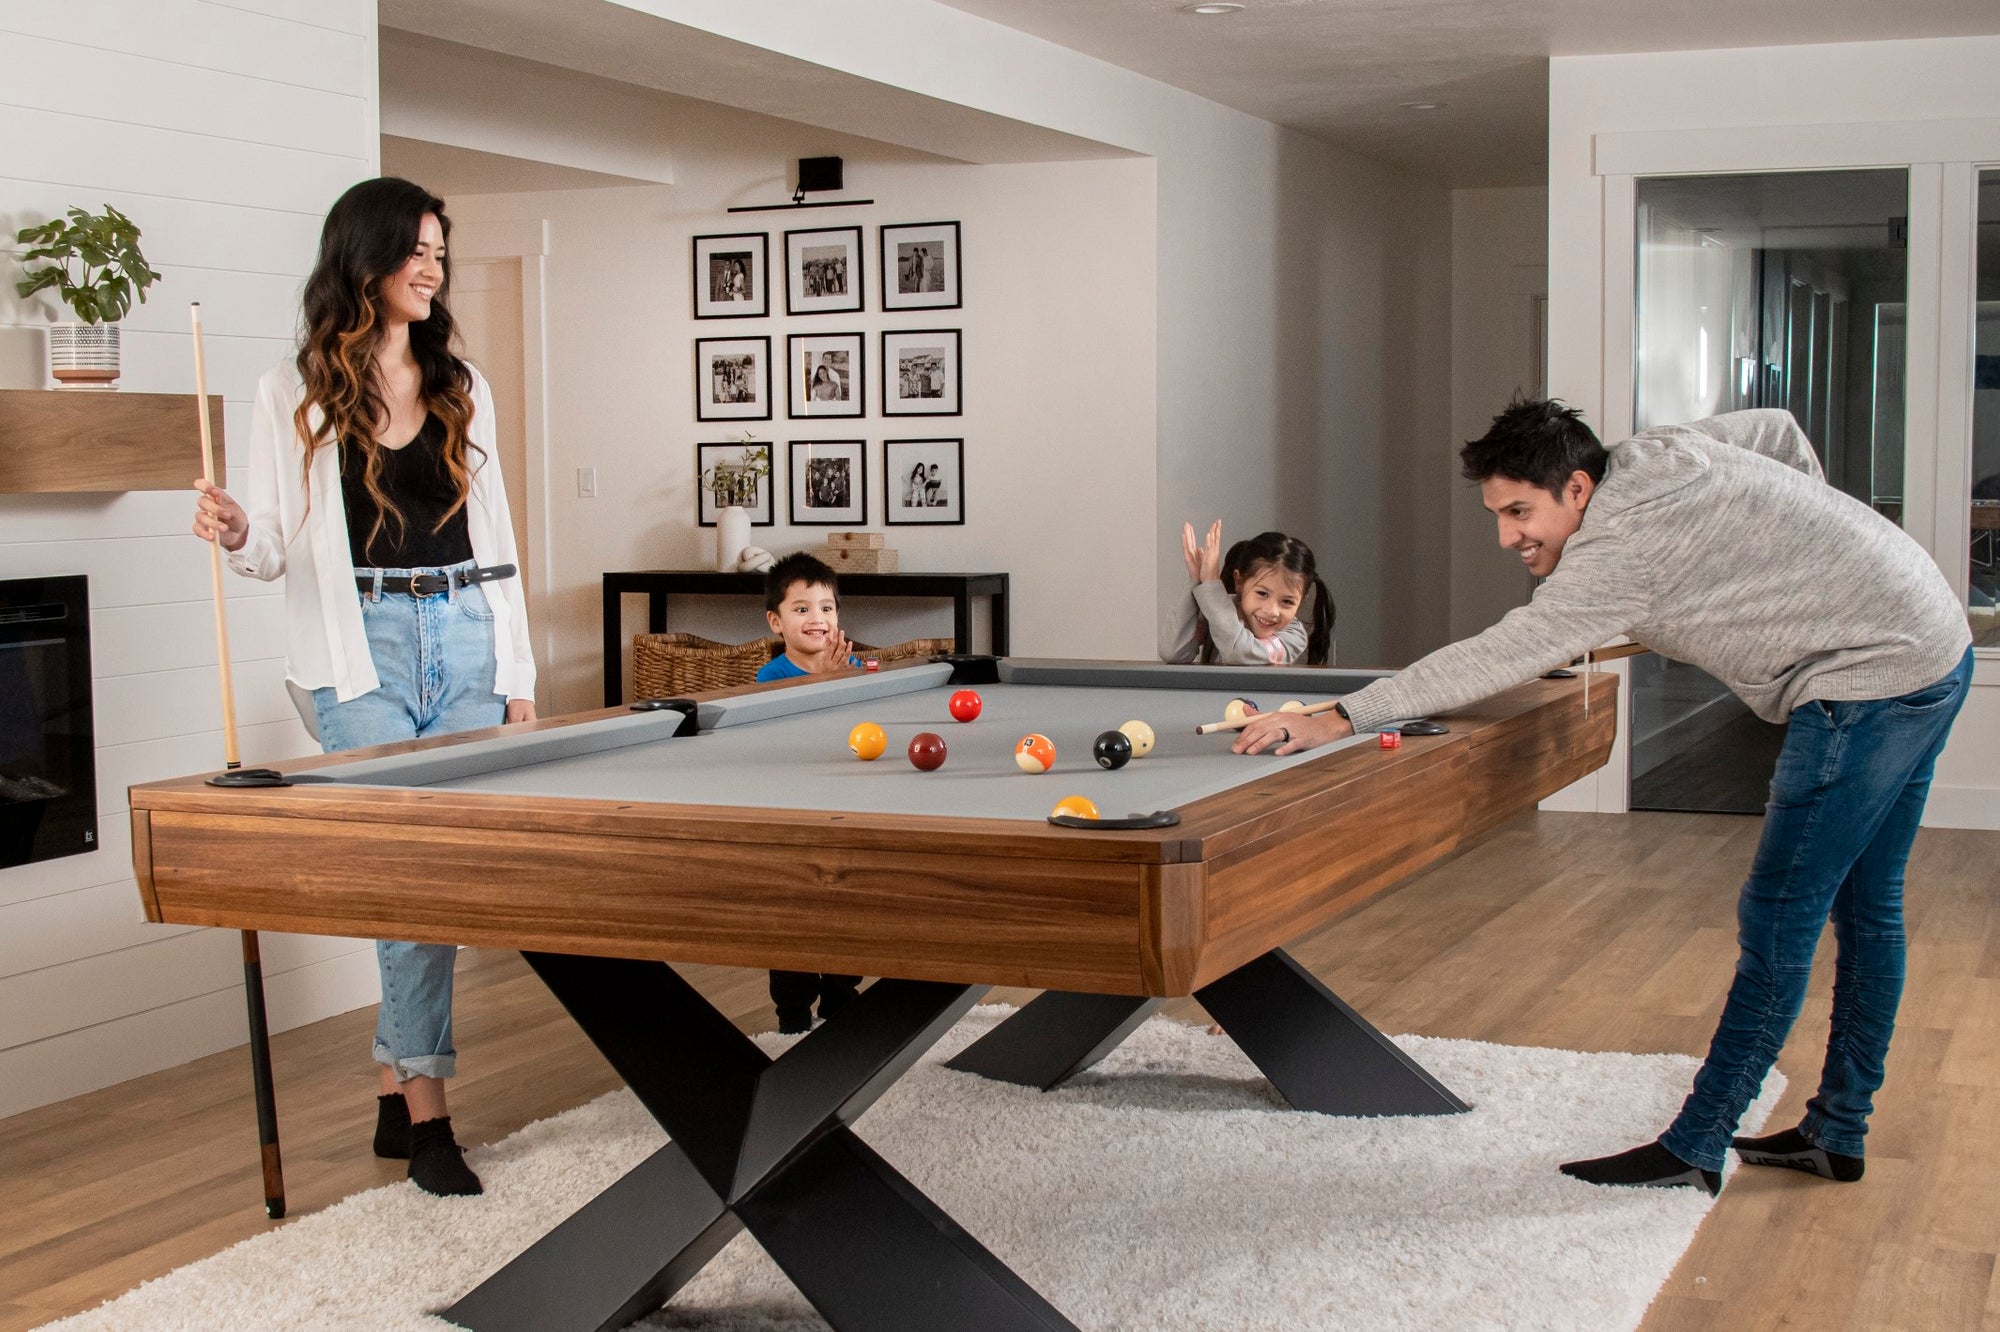 Pool table surrounded by family.  Husband is shooting pool with kids and wife looking